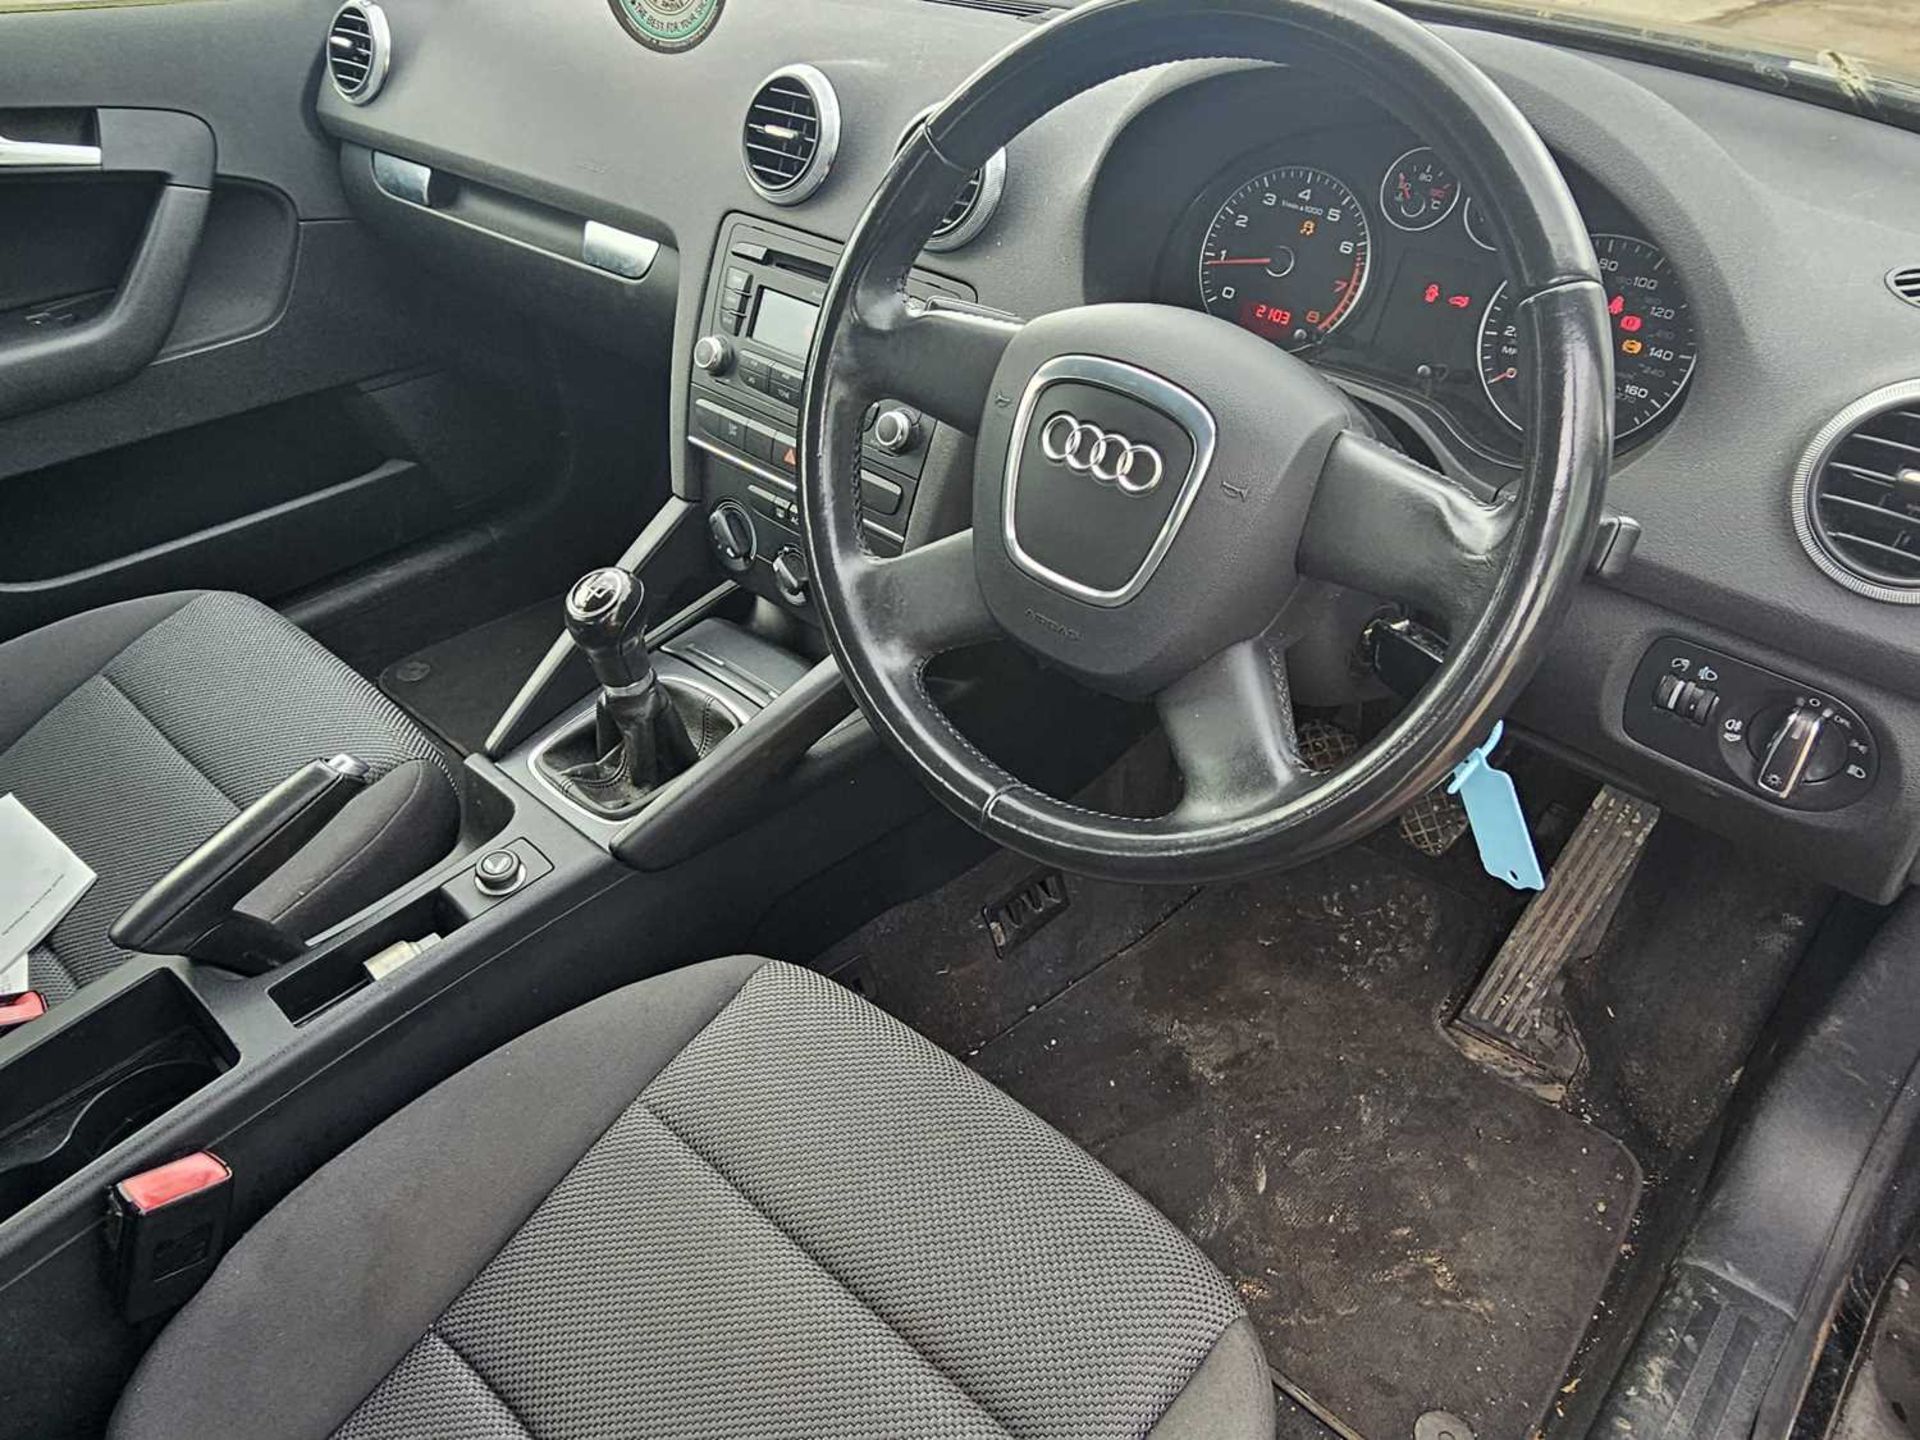 2009 Audi A3 5 Speed, A/C. (Reg. Docs. Available) - Image 24 of 27